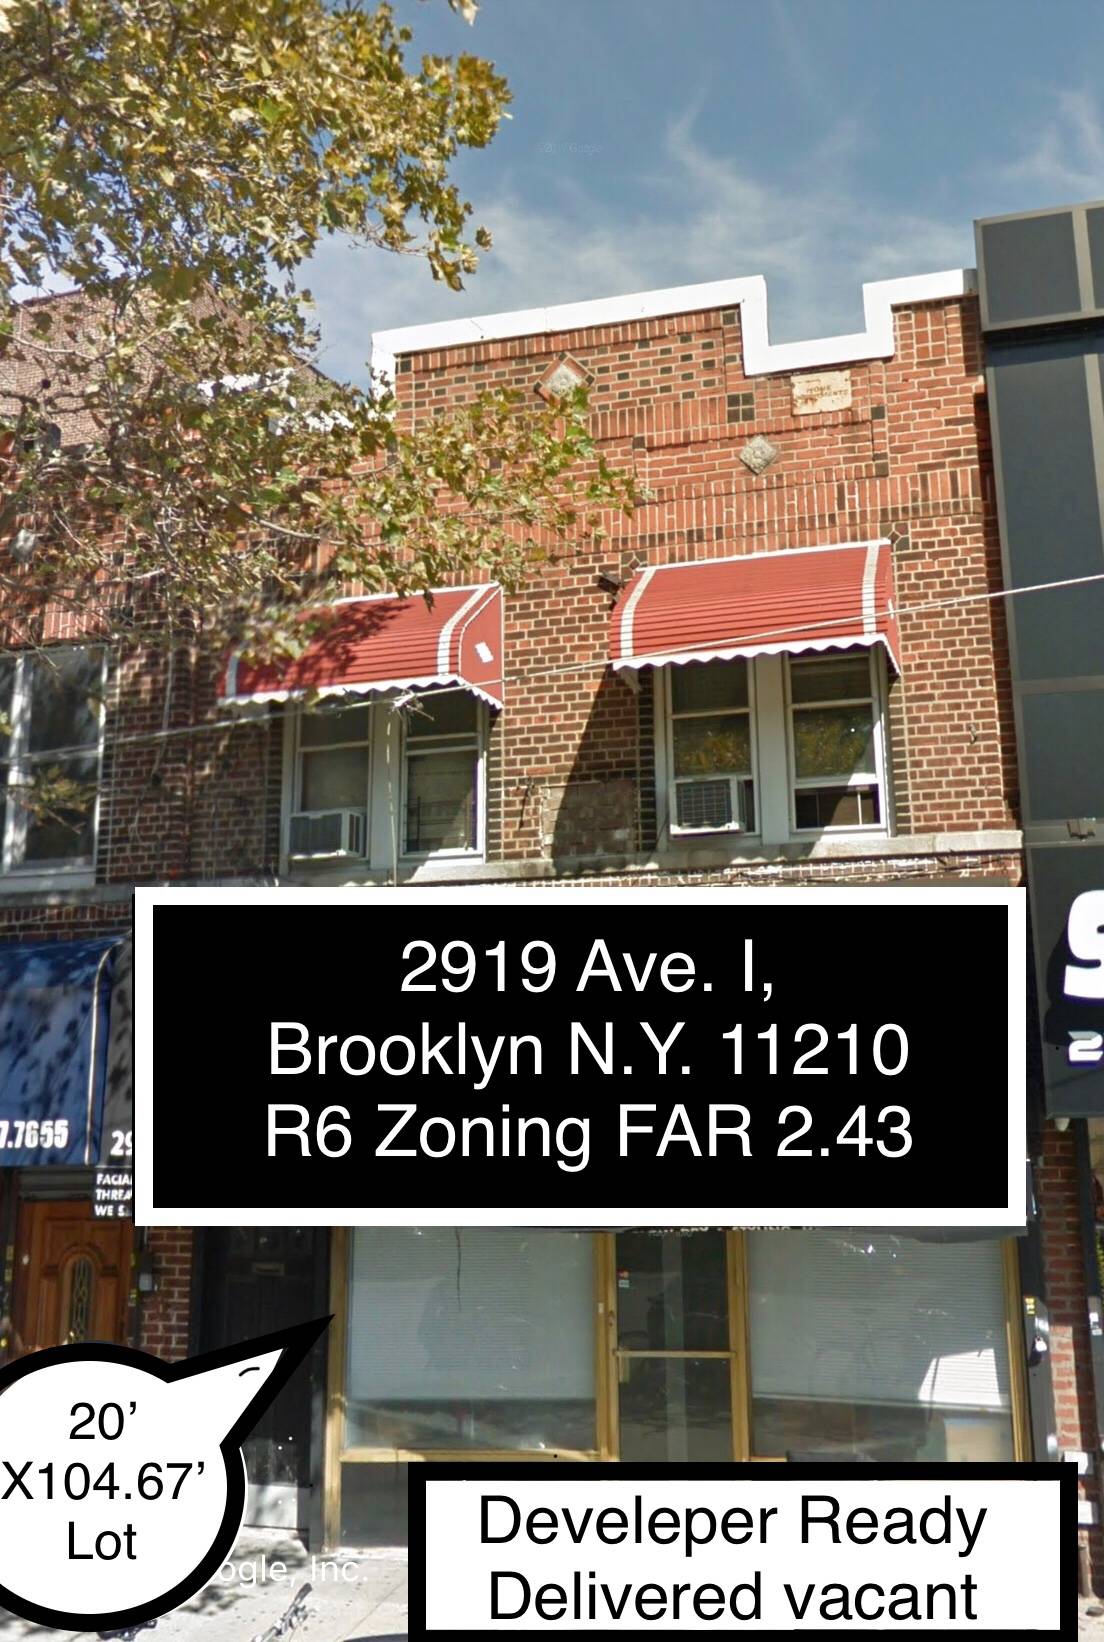 2919 Avenue I, Brooklyn New York 11210. A Mix-Use Development Opportunity, with air rights 12,000 ft. buildable space, R6 Zoning 2.43 FAR, also a combo deal is possible with an additional 4, adjacent lot’s with approx 60,000 ft. of buildable space.